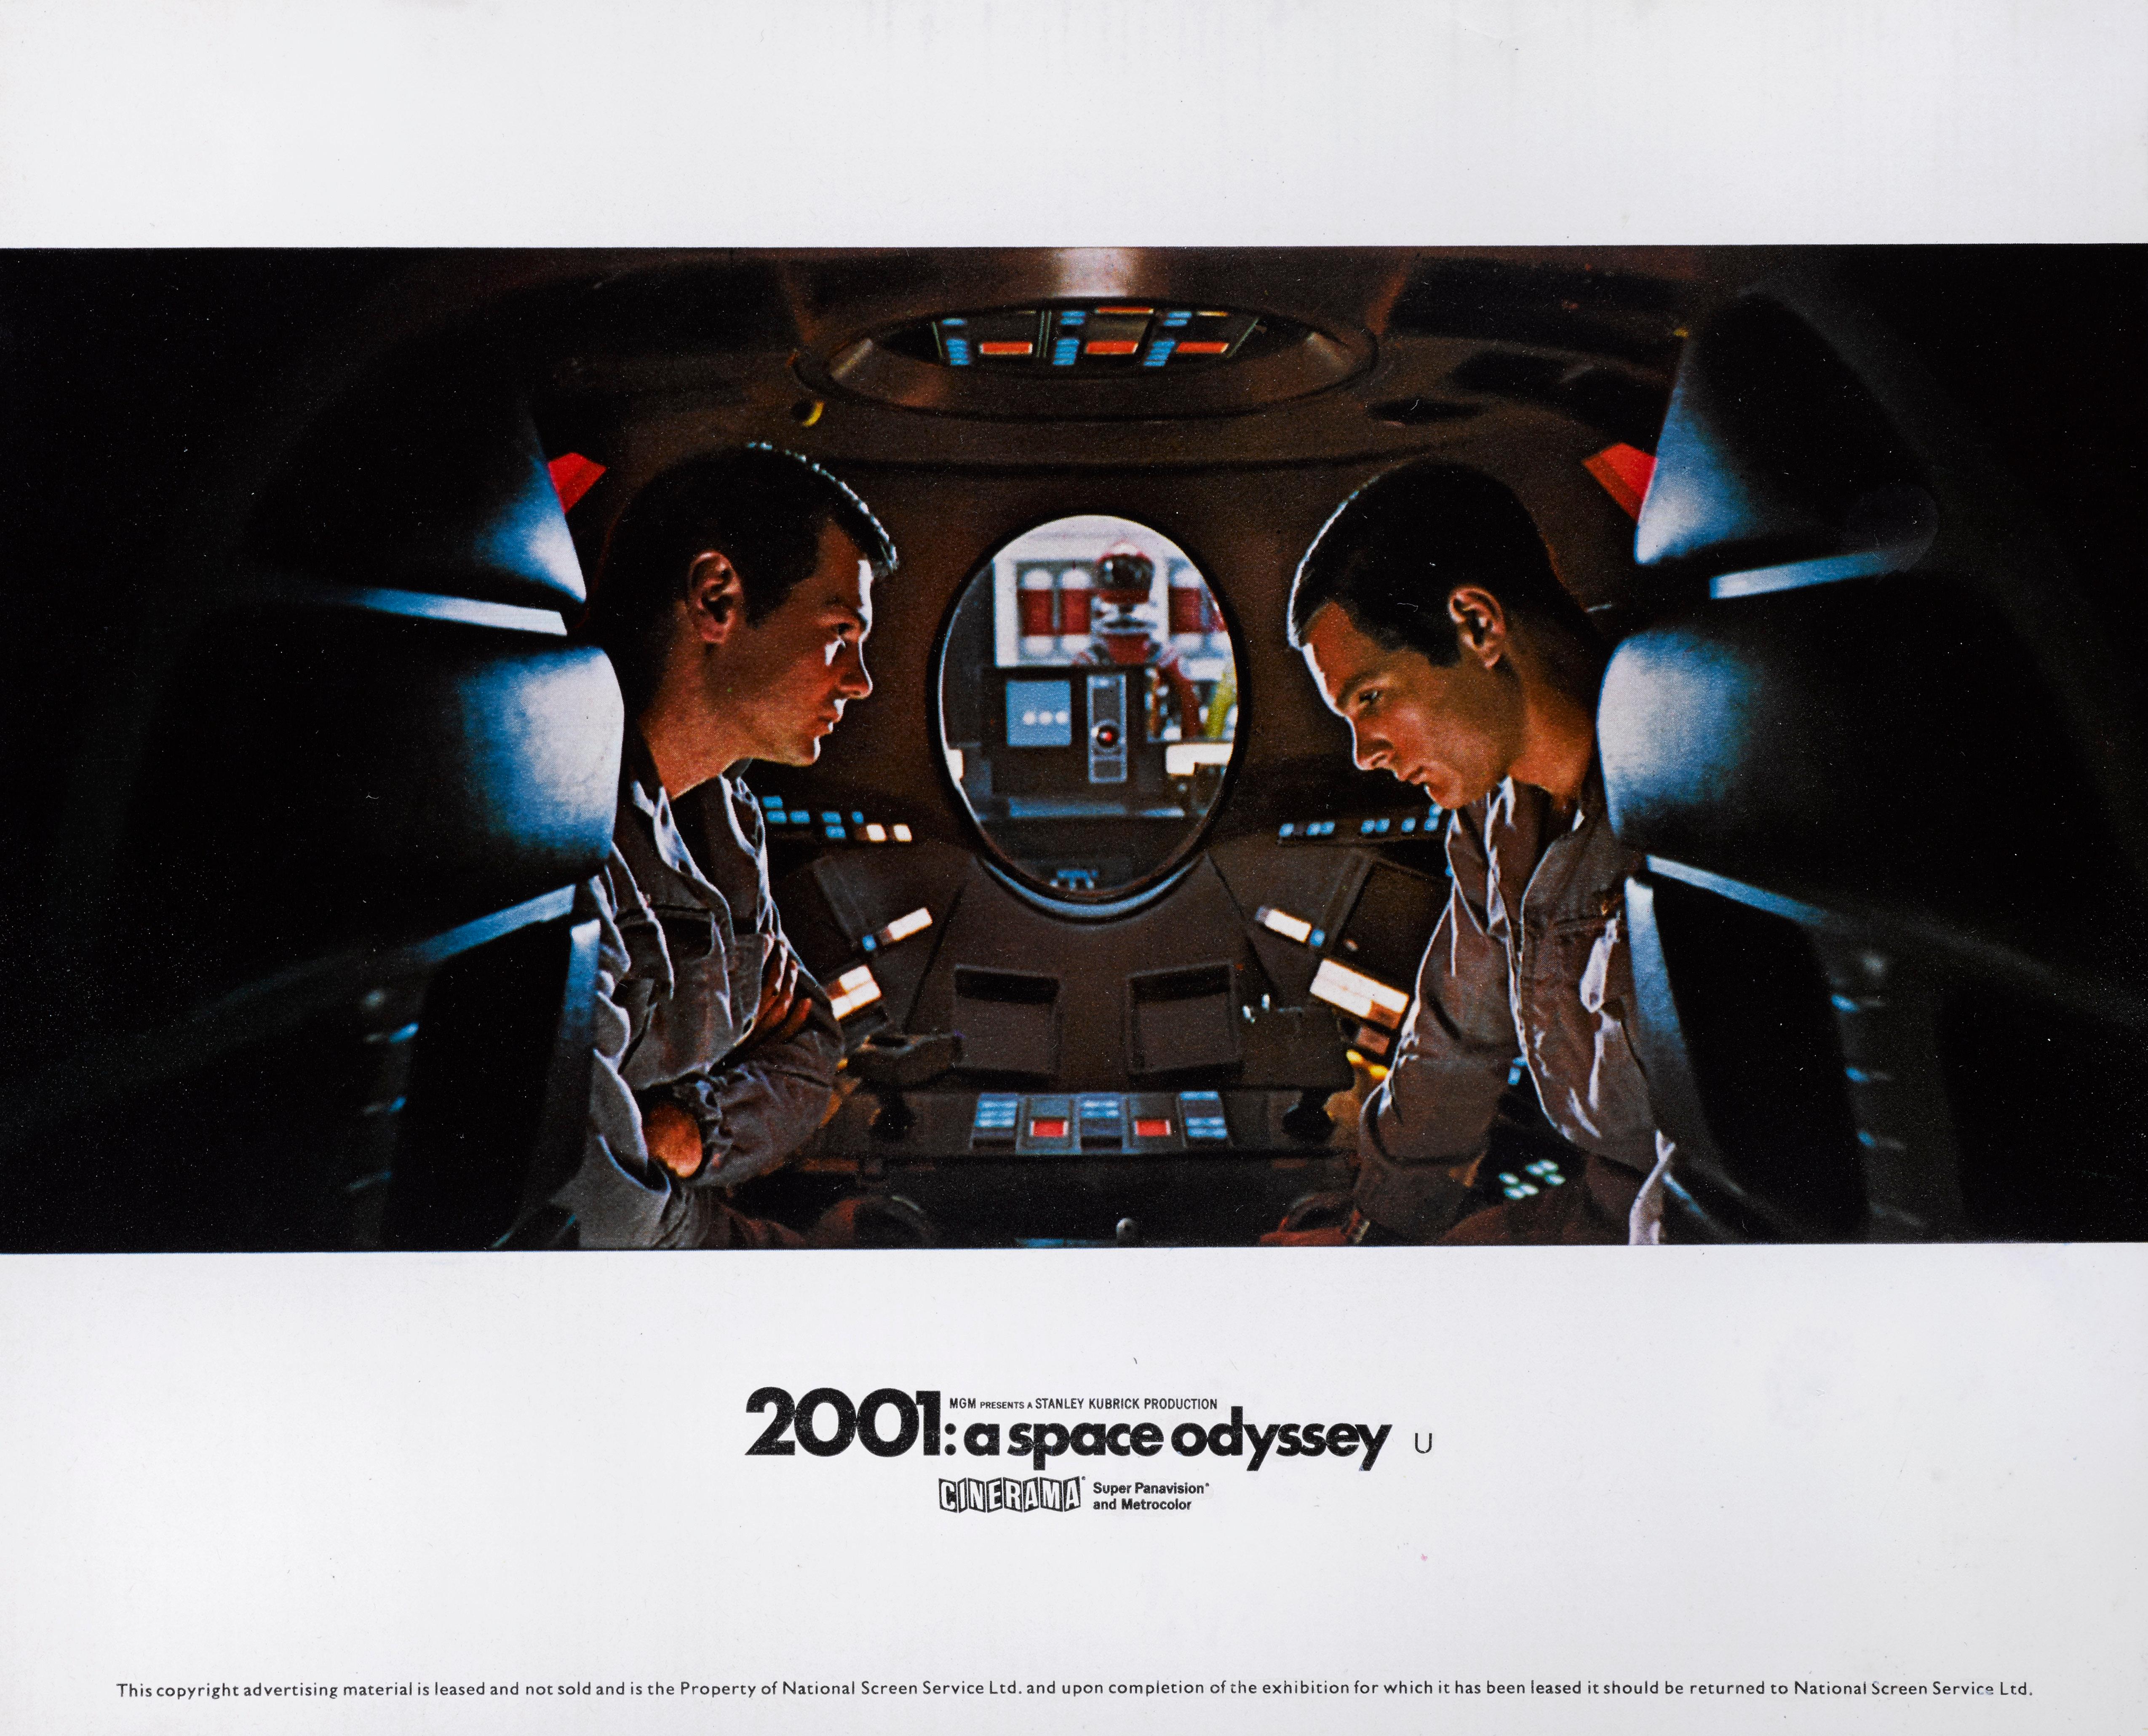 Original color production still for the Cinerama release of Stanley Kubrick's 2001: A Space Odyssey.
The Cinerama release stills are much harder to find and more desirable.
This scene if when the men enter a space pod to avoid being overheard.